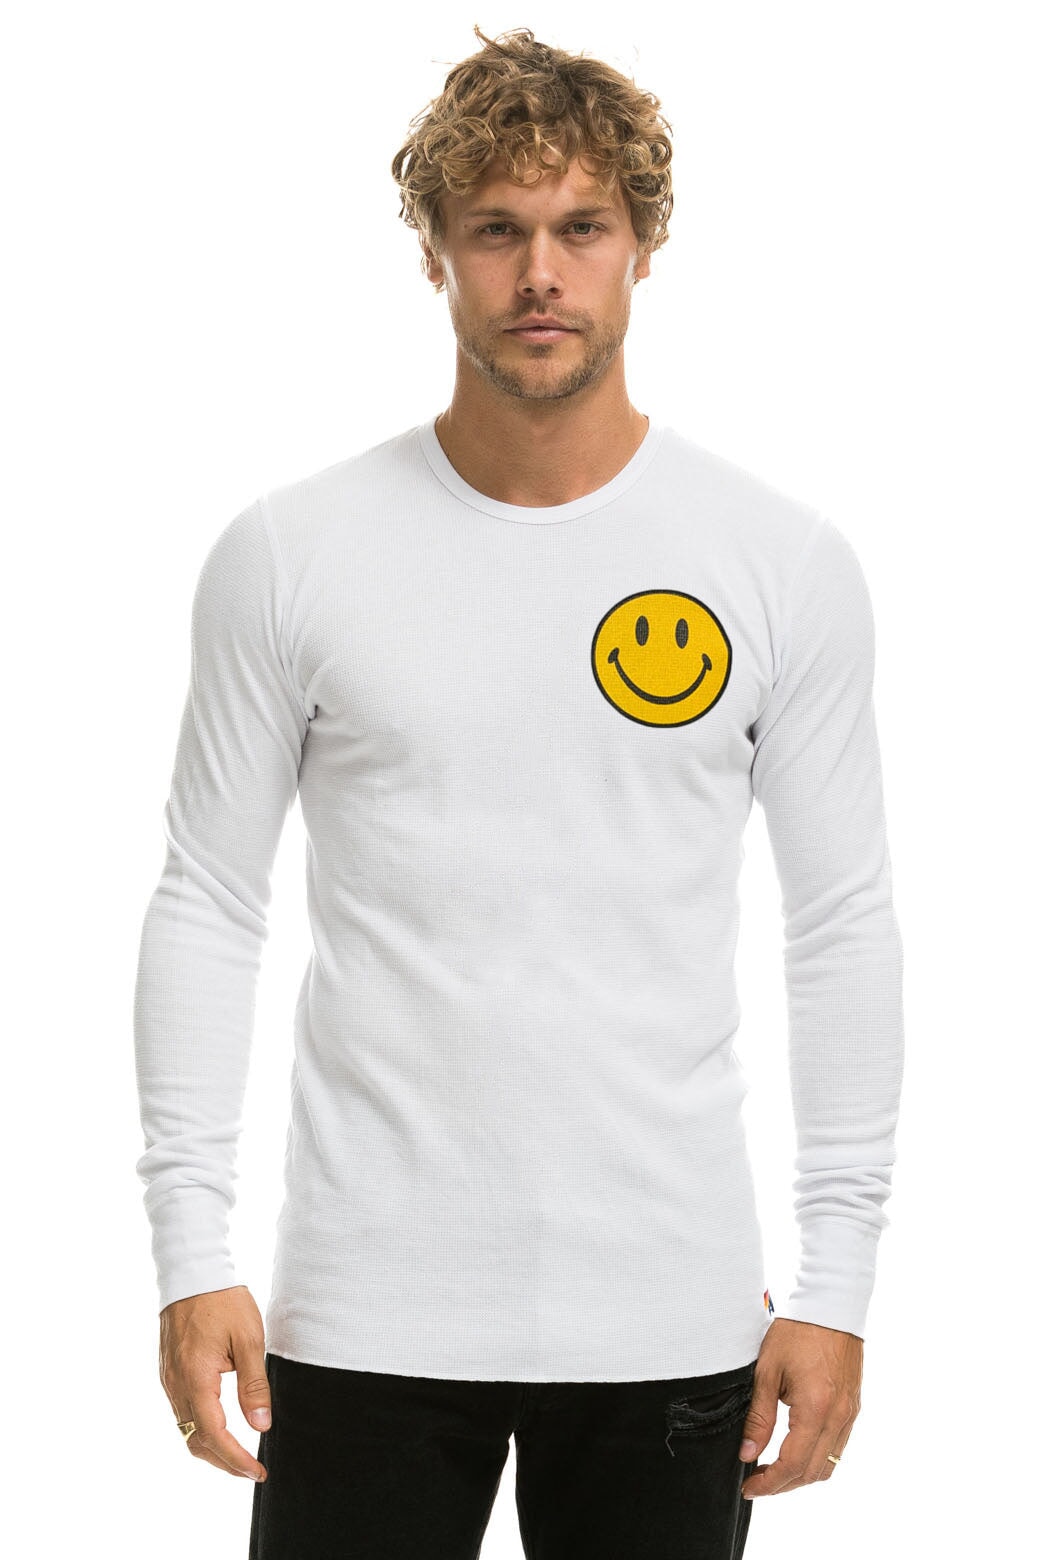 SMILEY 2 THERMAL - WHITE Thermal Aviator Nation 